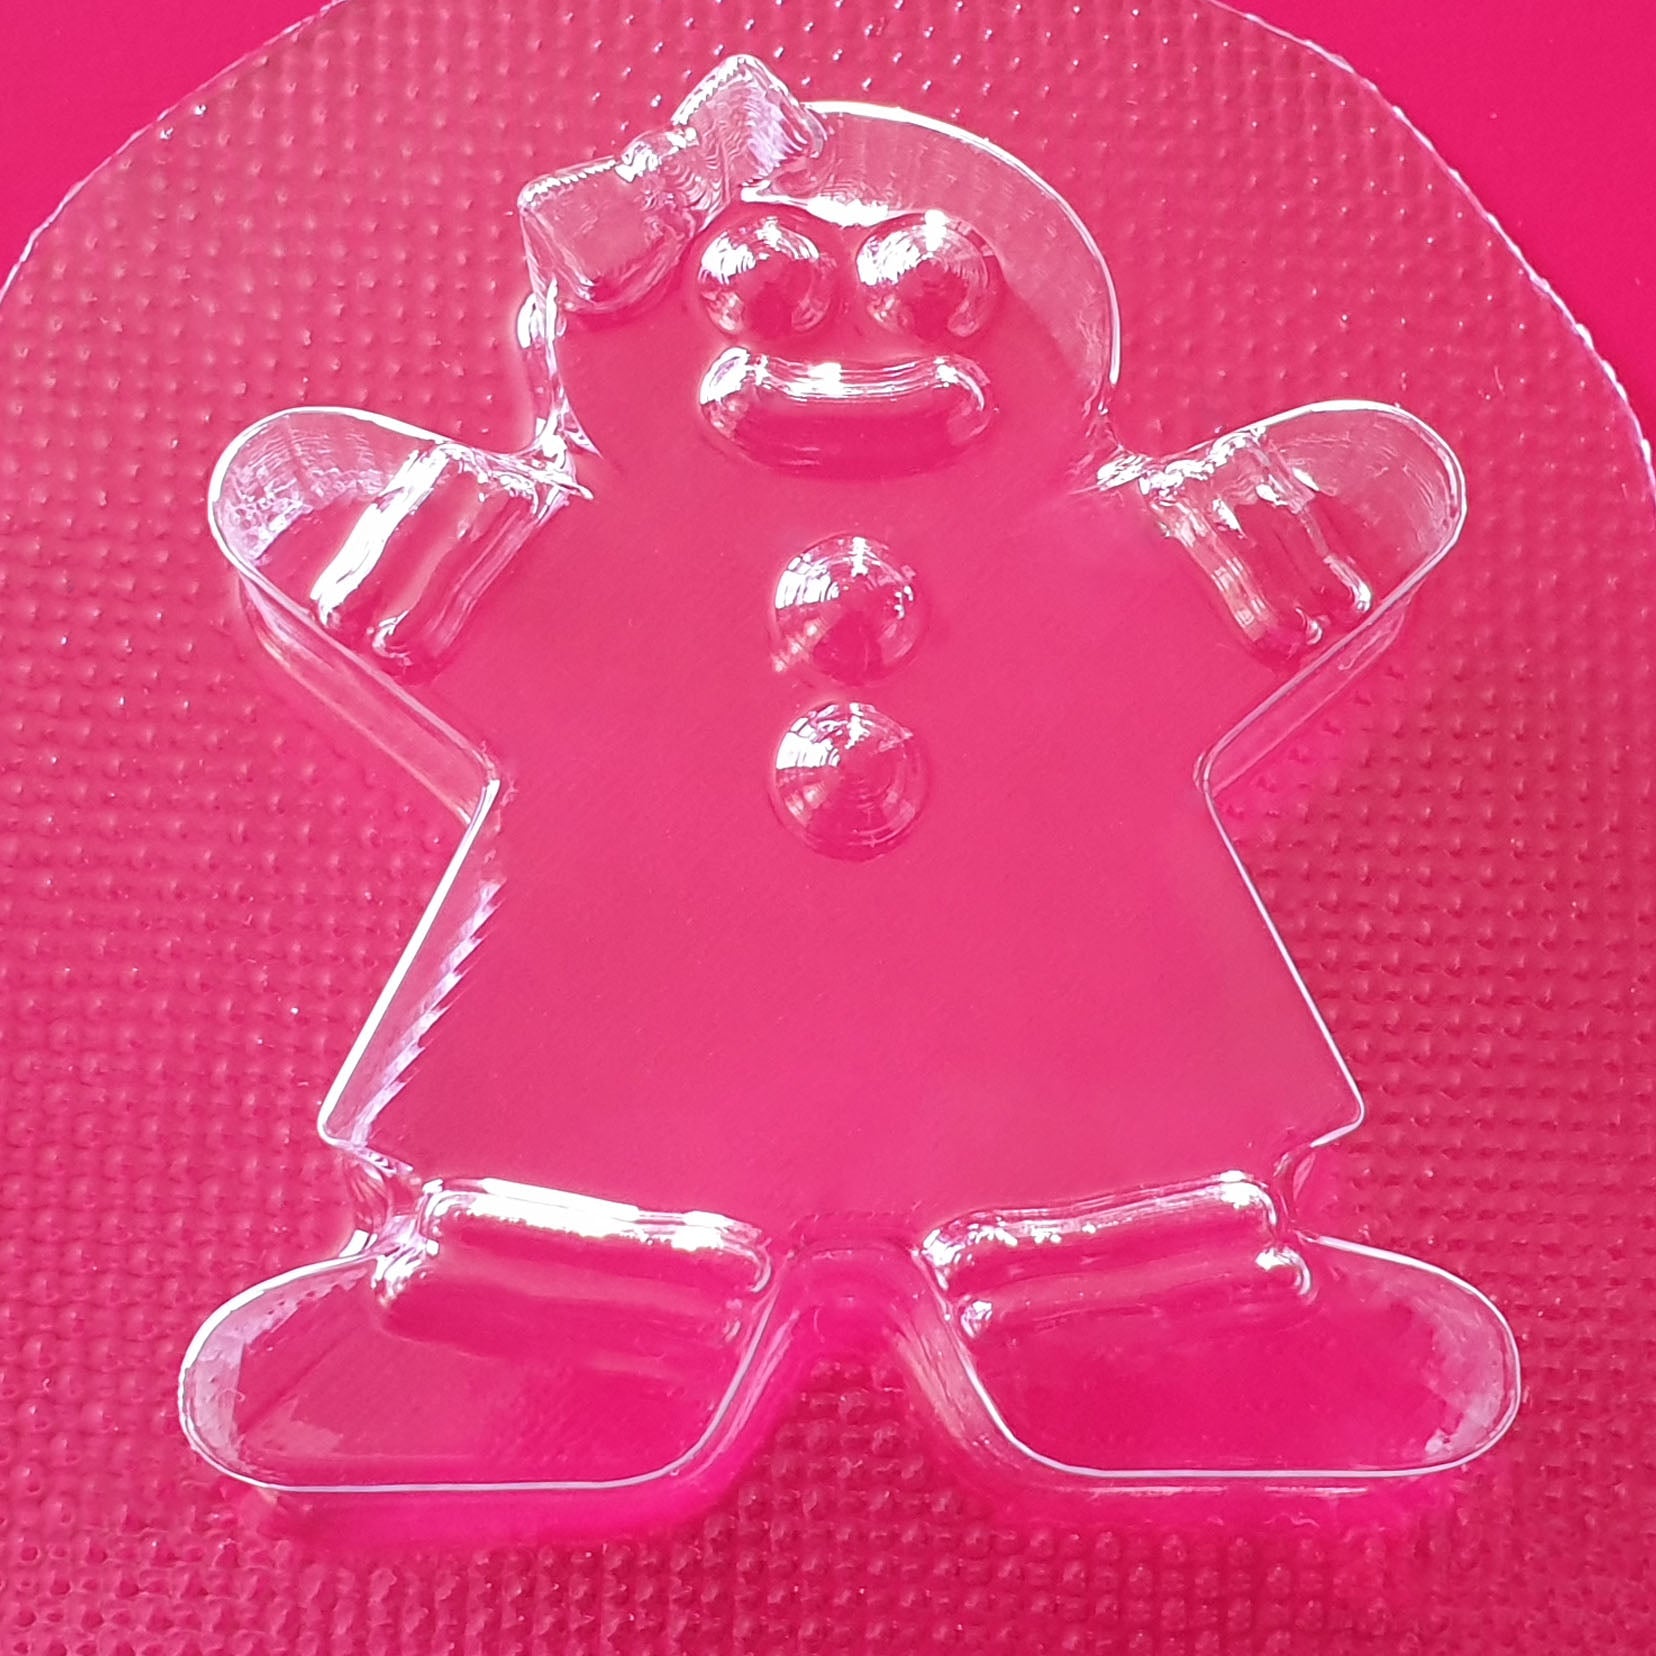 Gingerbread Woman Mould | Truly Personal | Bath Bomb, Soap, Resin, Chocolate, Jelly, Wax Melts Mold